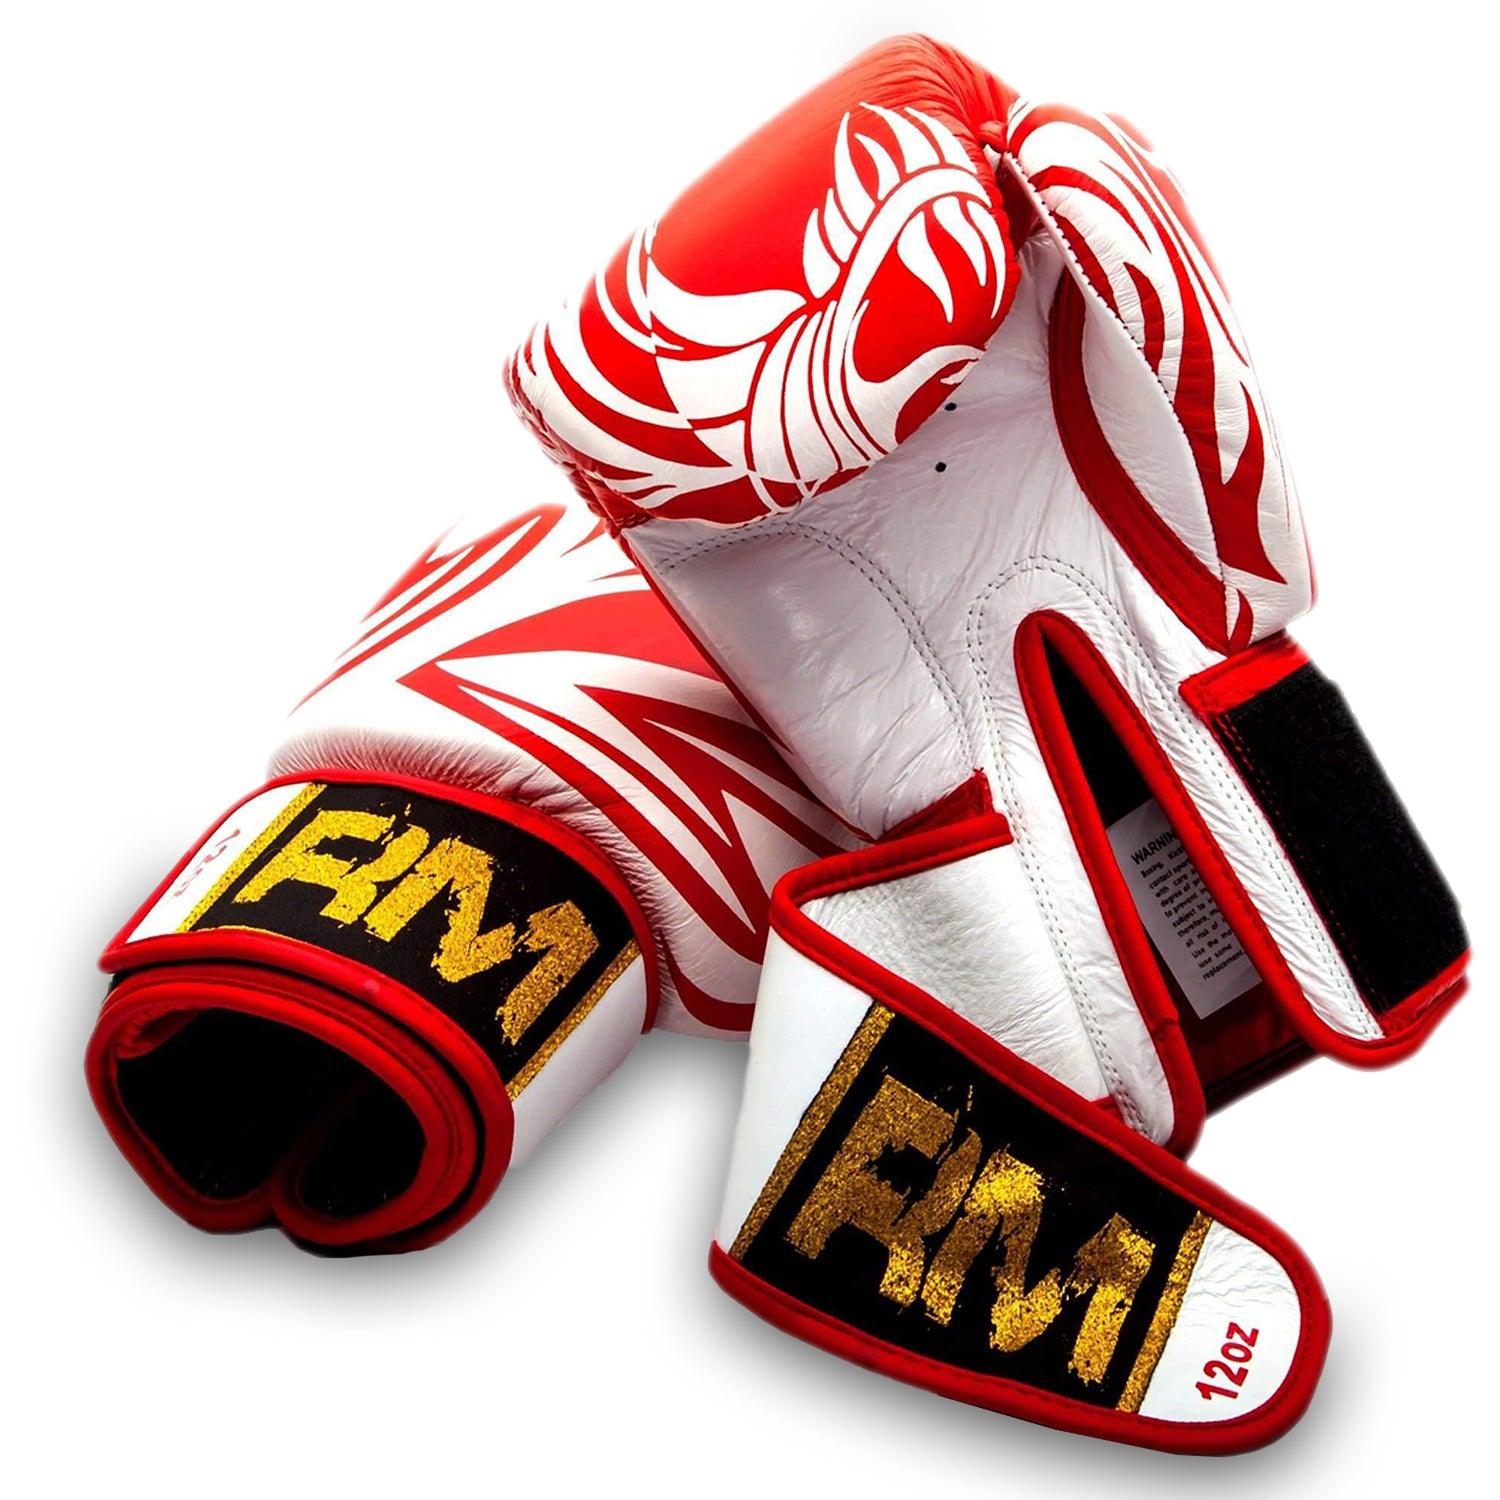 RingMaster Sports Genuine Leather Boxing Gloves White and Red Patterned - RINGMASTER SPORTS - Made For Champions